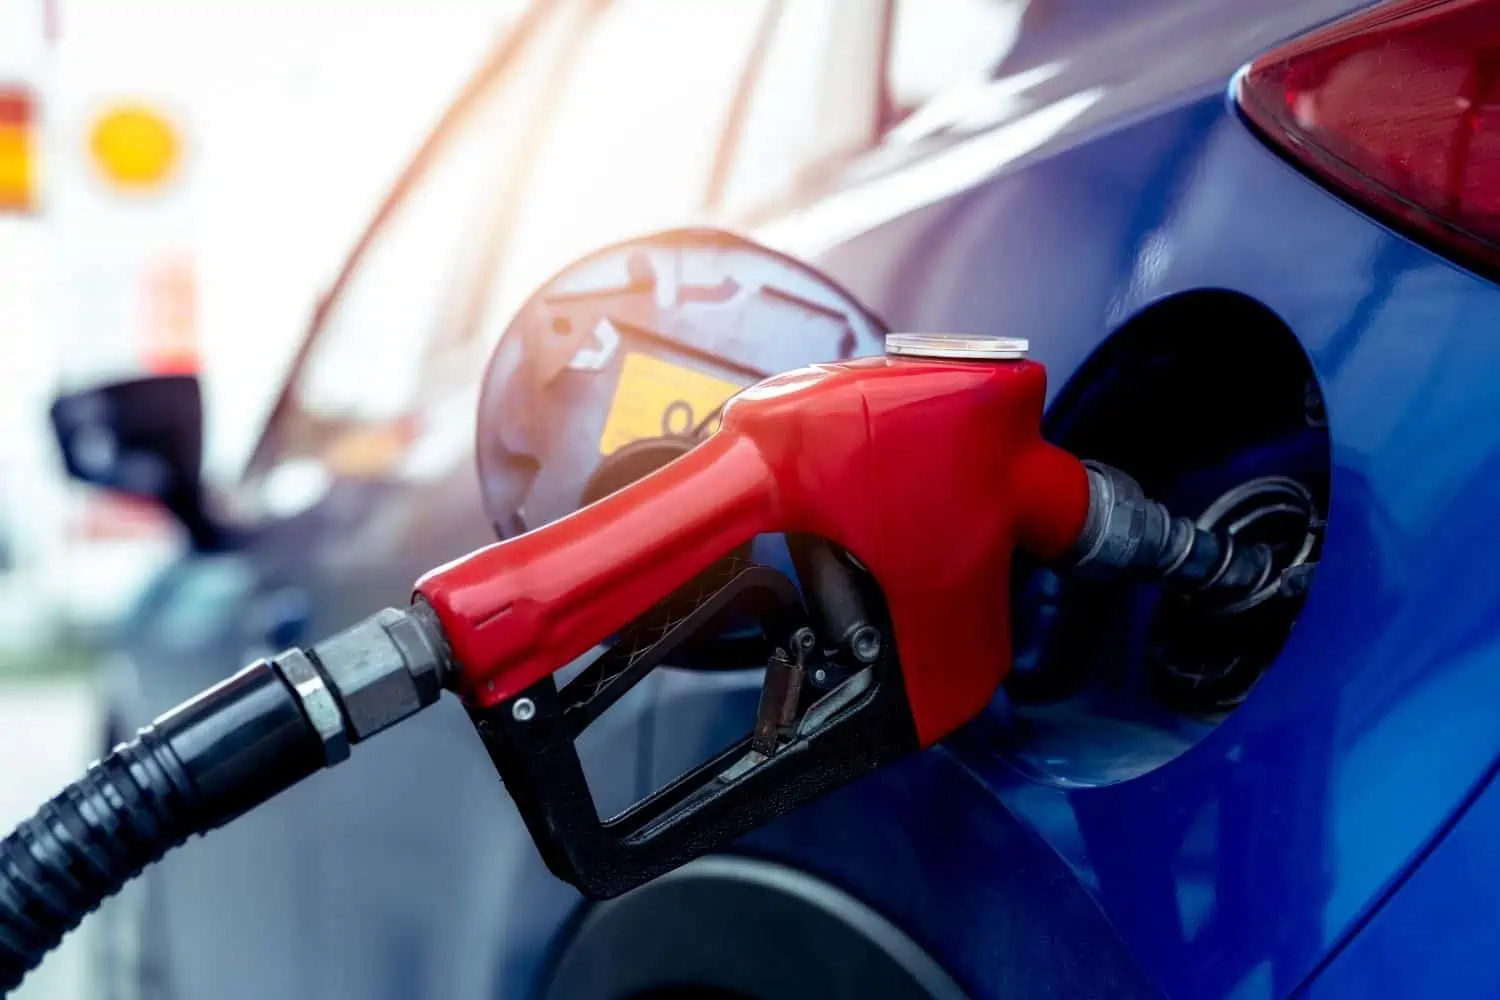 PETROL PRICE: Here is the official March fuel prices